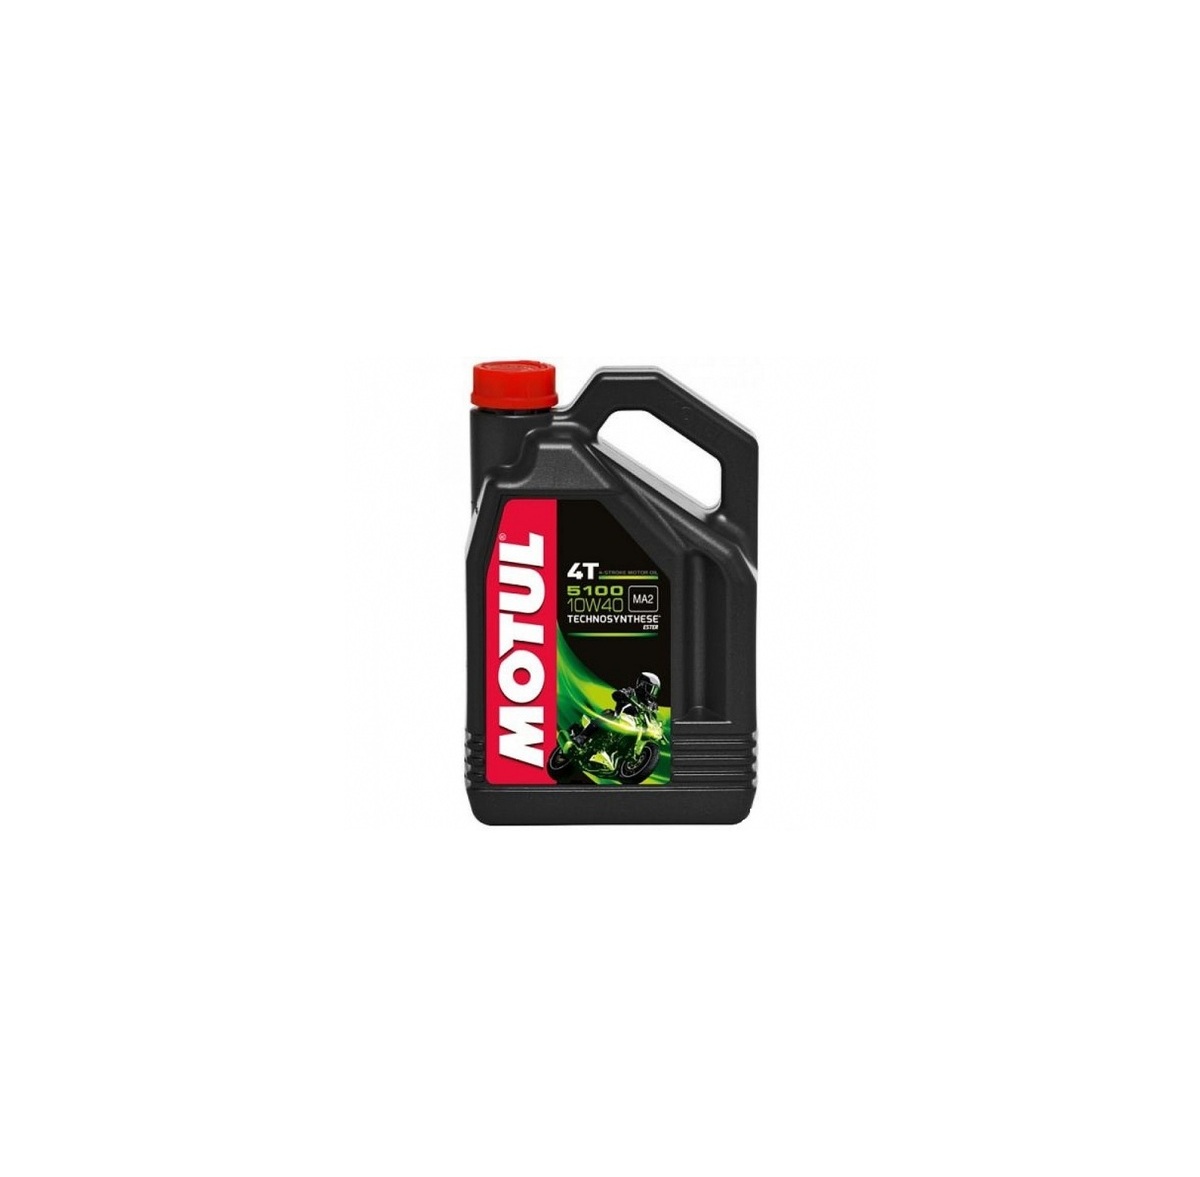 <span style="font-weight: bold;">Масло моторное MOTUL 5100 10W-40 4Т, 4 л.</span>&nbsp;